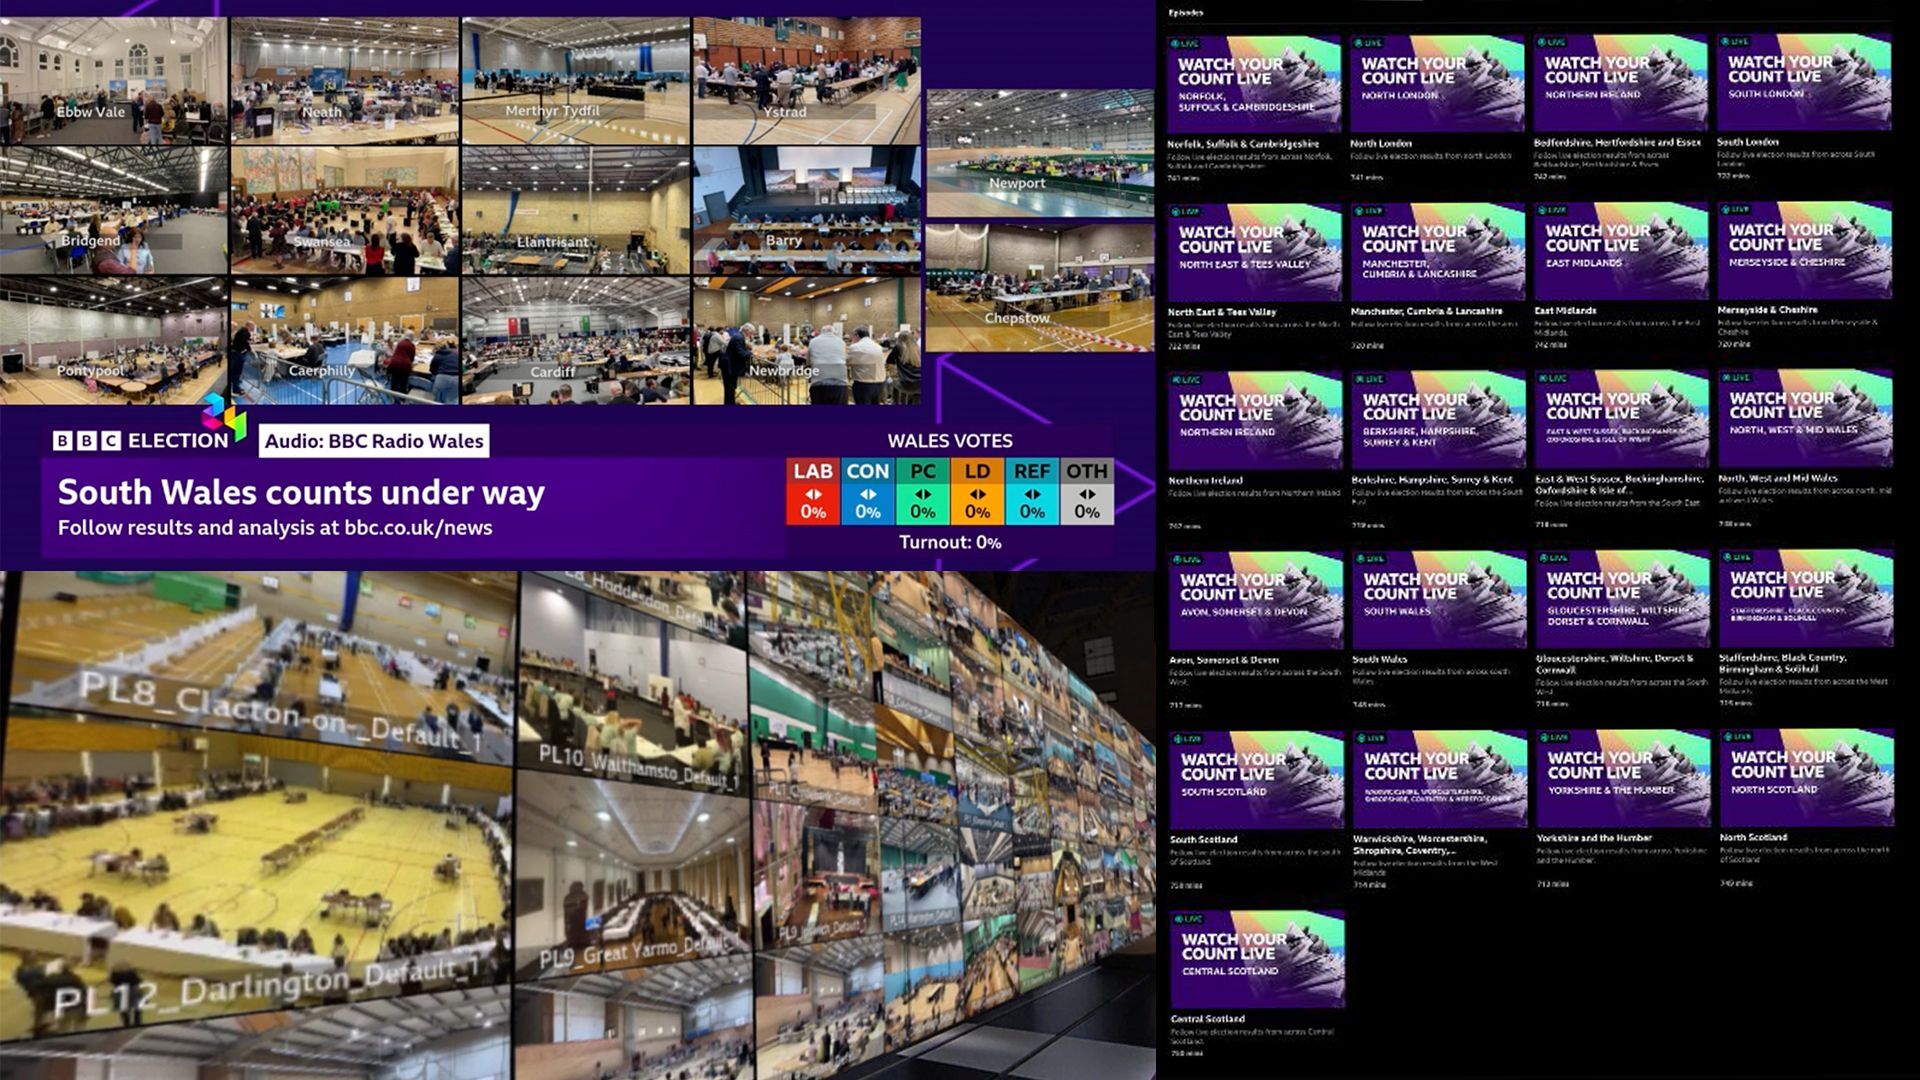 Live broadcast - TVU Networks and BBC - Mosaic Coverage - Grid View